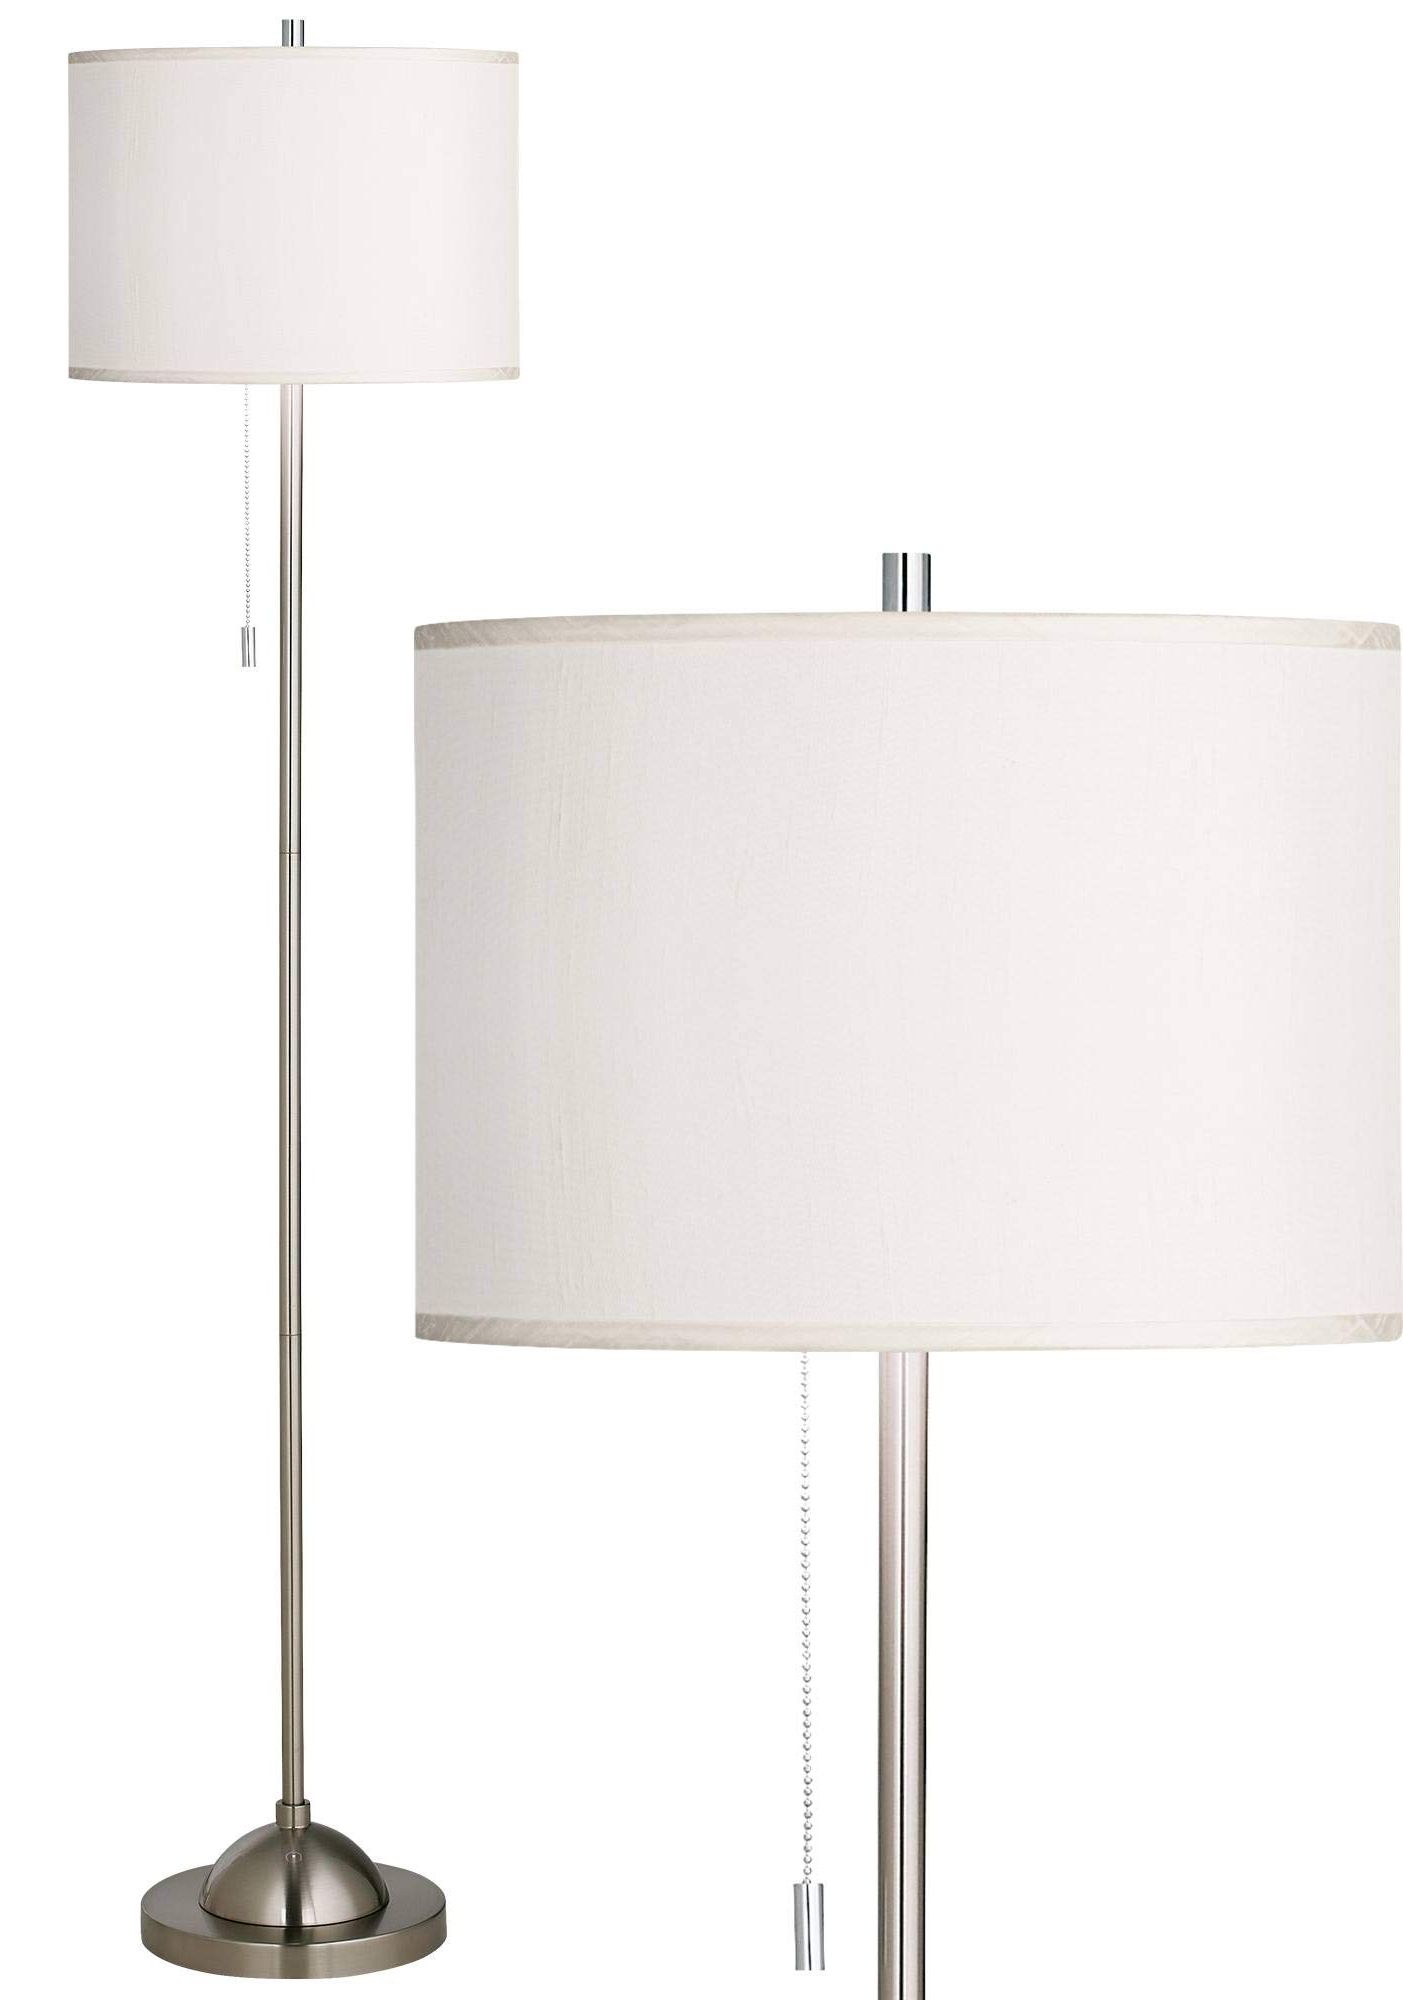 Well Known Textured Fabric Standing Lamps With Regard To Possini Euro Design Modern Minimalist Pole Lamp Floor Standing Thin 62"  Tall Brushed Nickel Silver Cream Textured Fabric Drum Shade Decor For  Living Room Reading House Bedroom Home – – Amazon (View 11 of 15)